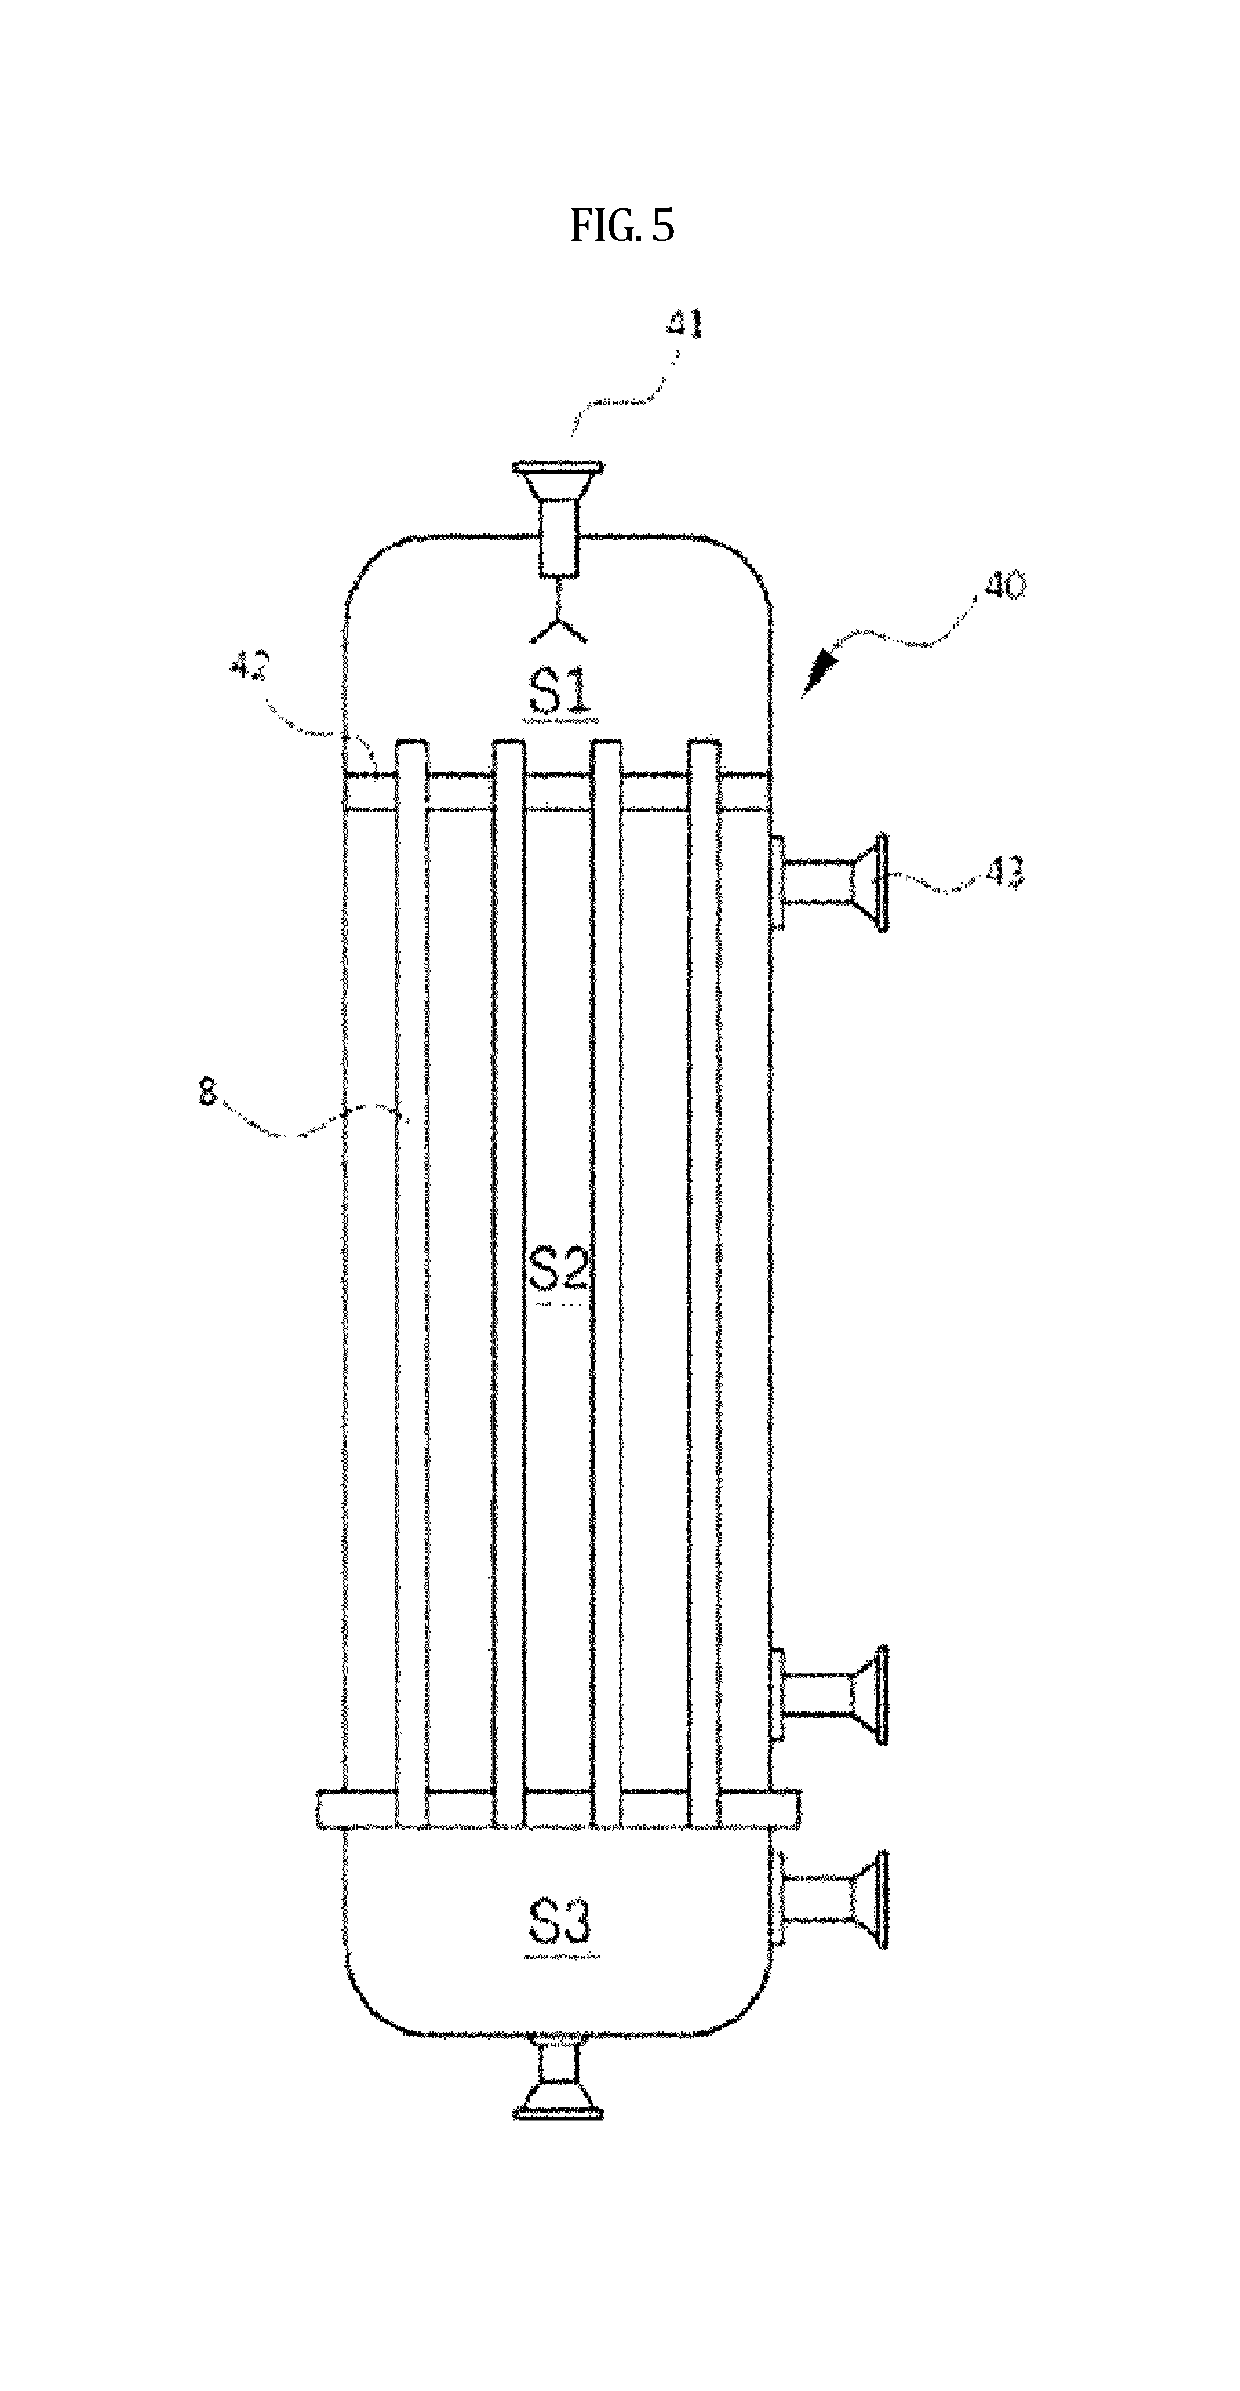 Apparatus for evaporative concentration of water to be treated, which uses hot lime softening, and method for evaporative concentration of water using the same